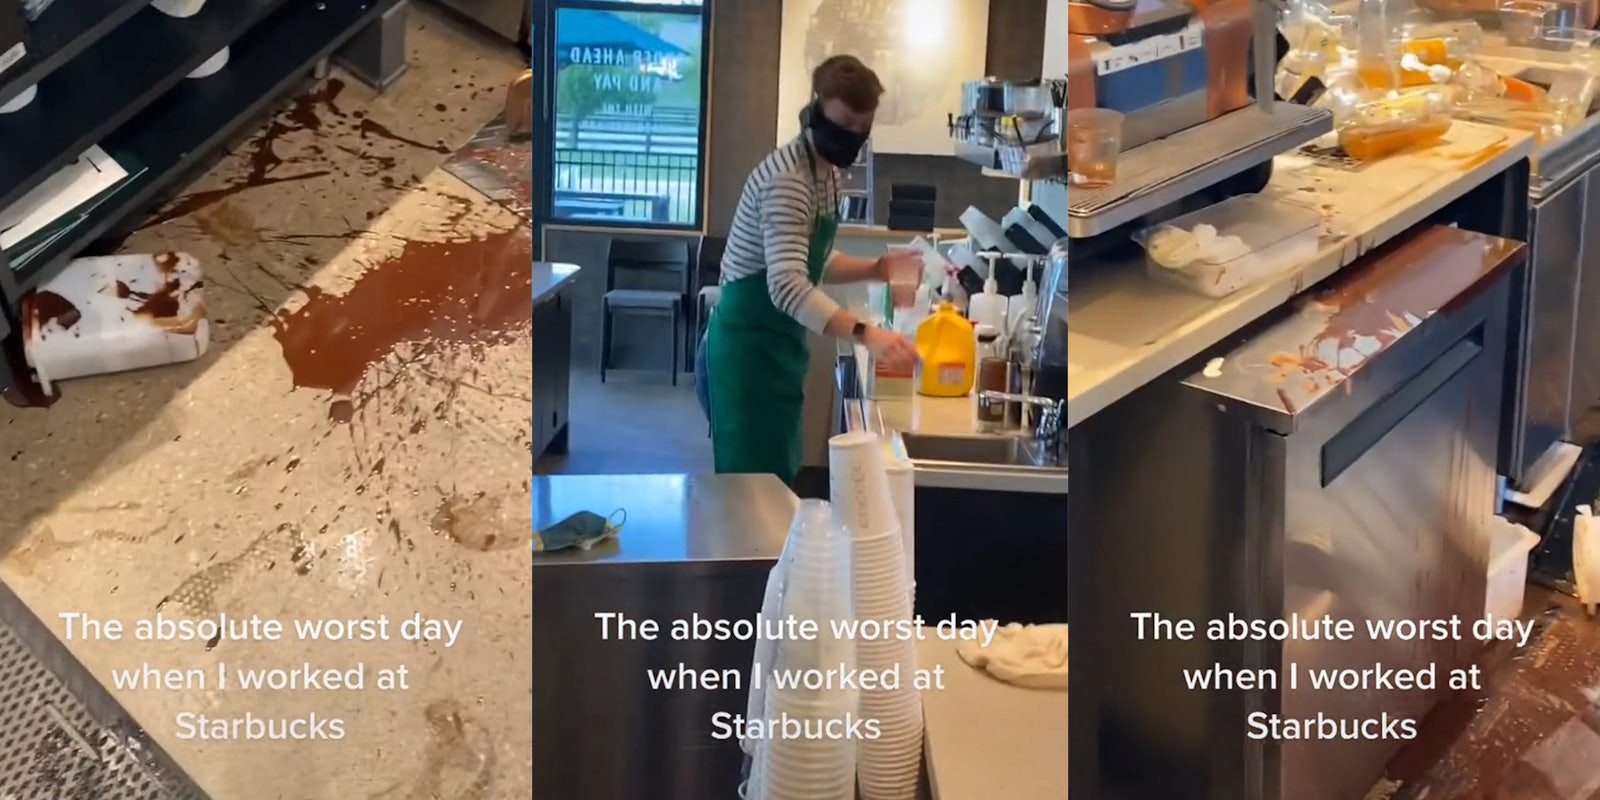 brown substance spattered and spilled all over Starbucks equipment with worker making drink, caption 'The absolute worst day when I worked at Starbucks'